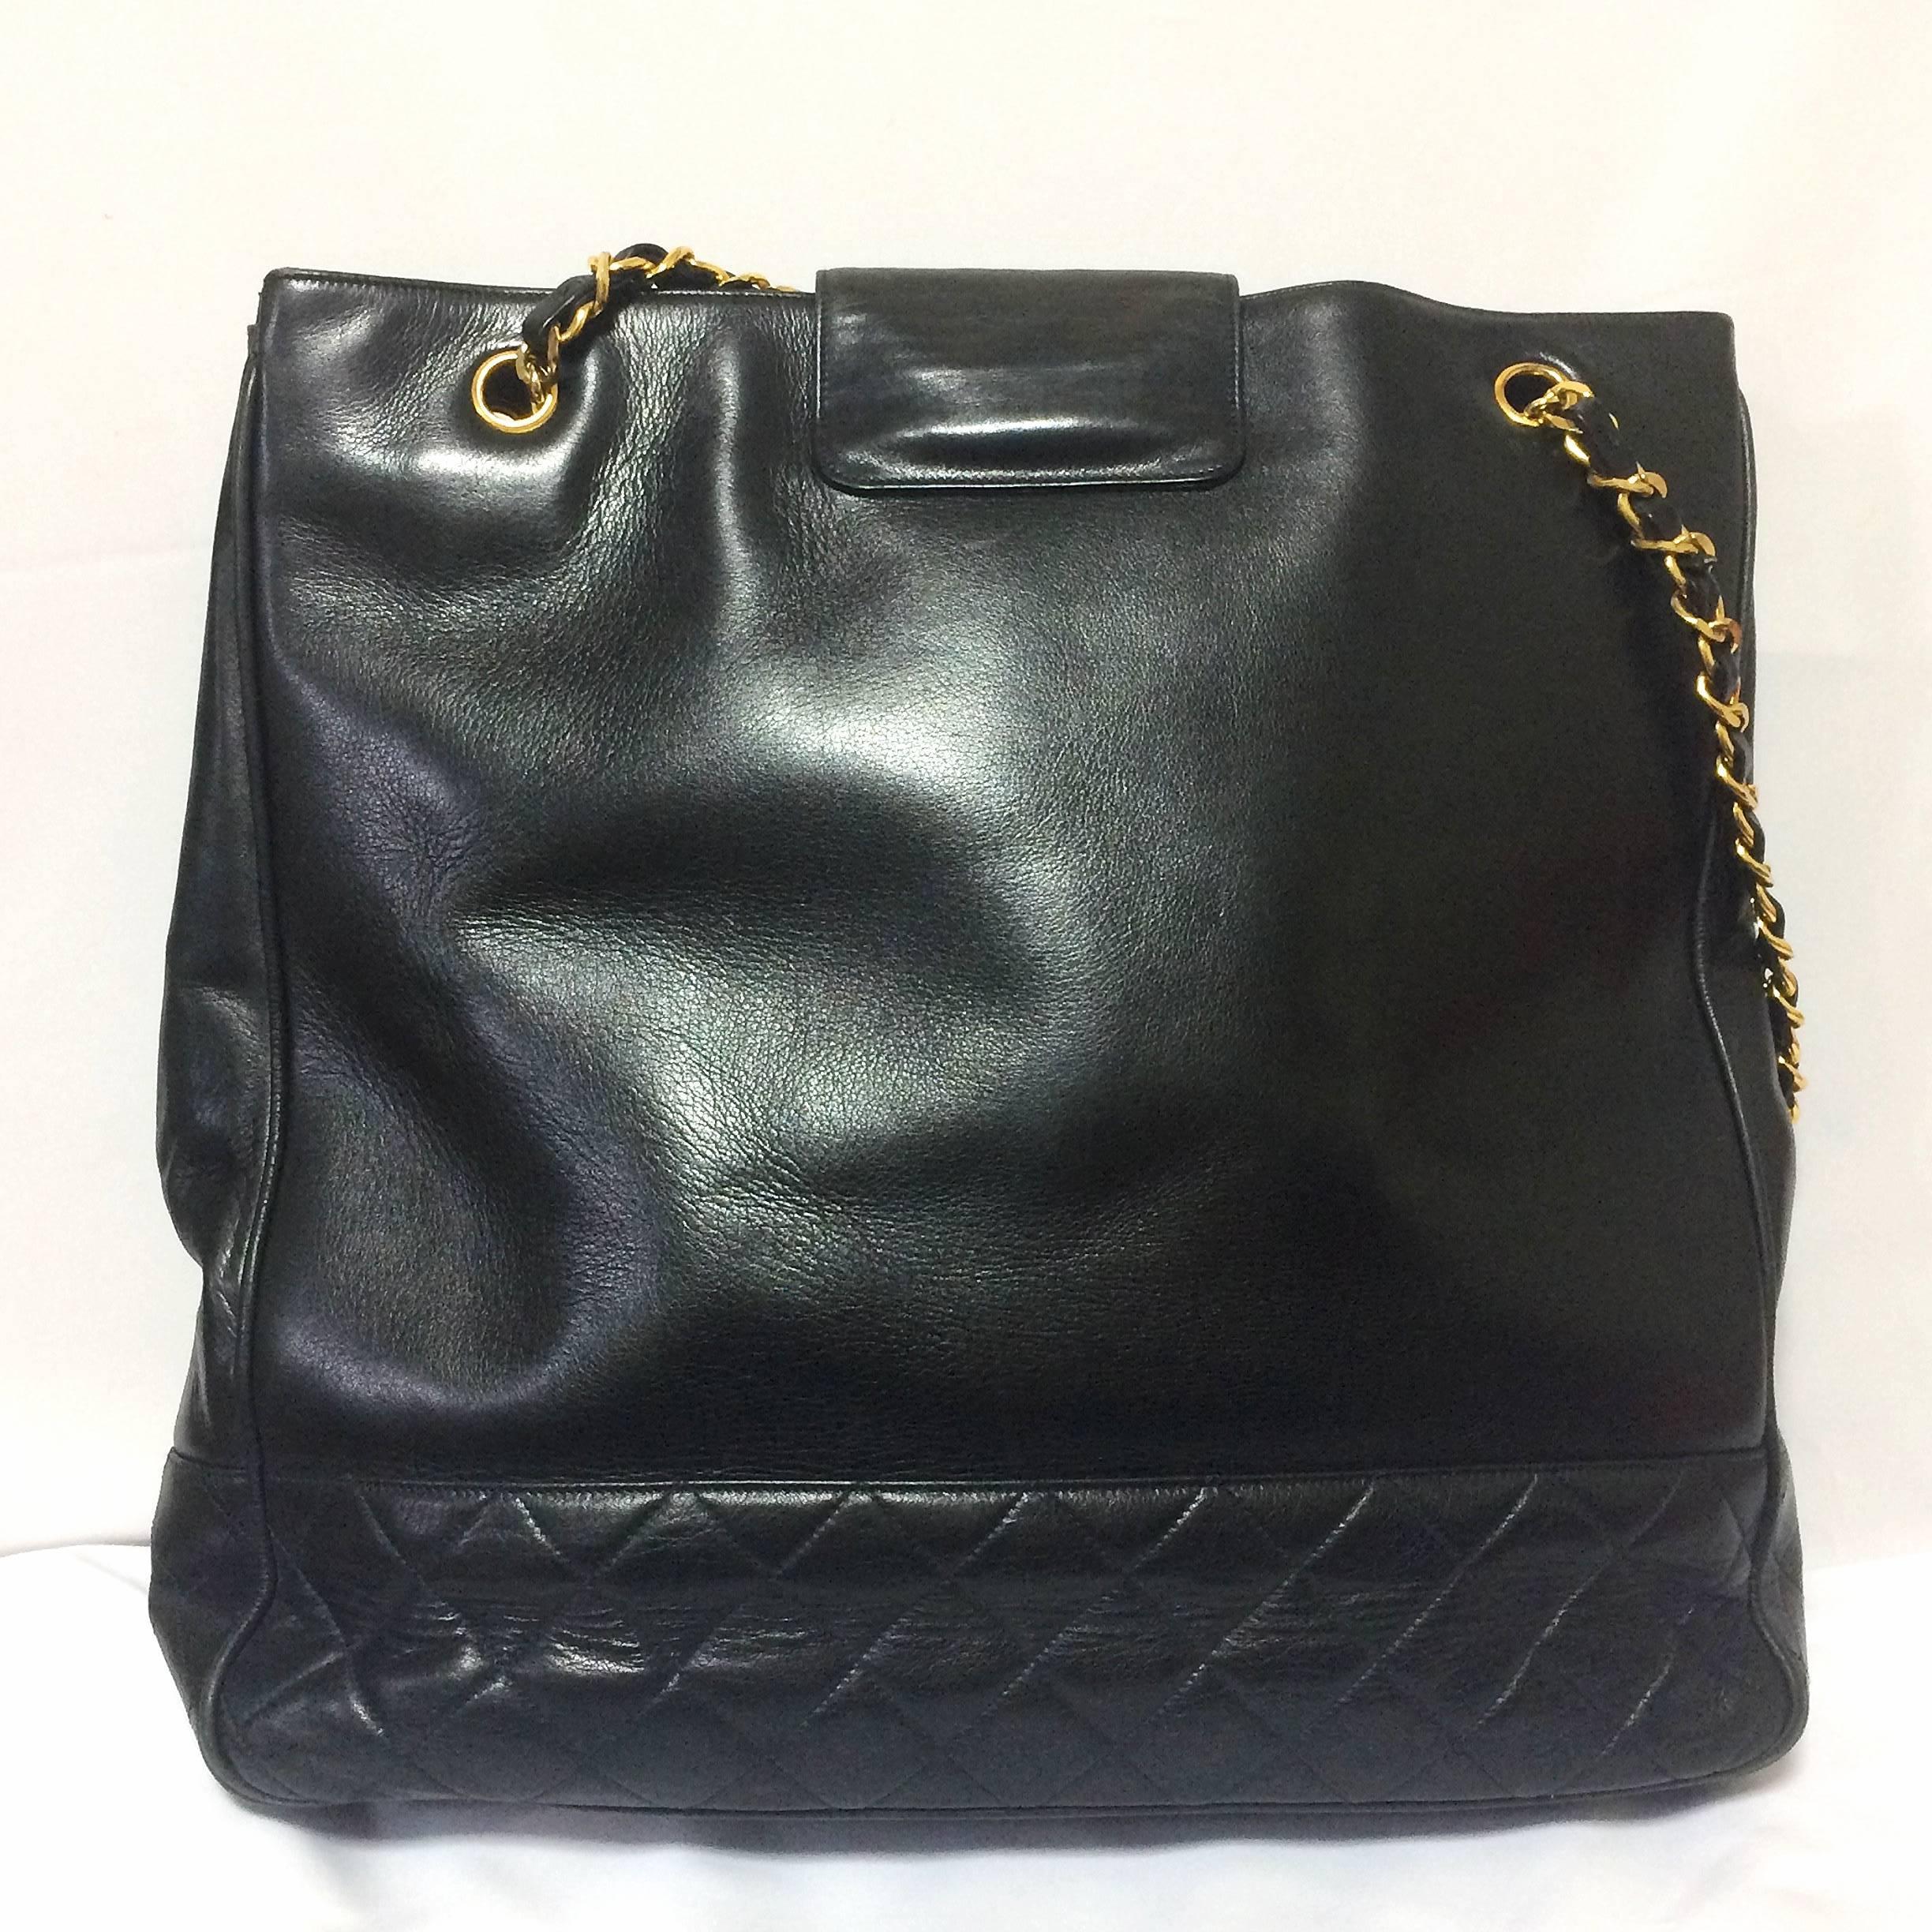 1990s. Vintage CHANEL black calf leather large chain shoulder tote bag with golden CC mark motif at flap. Classic purse for daily use.

Introducing a vintage CHANEL black leather large tote bag from the early 90's.

Featuring its iconic gold